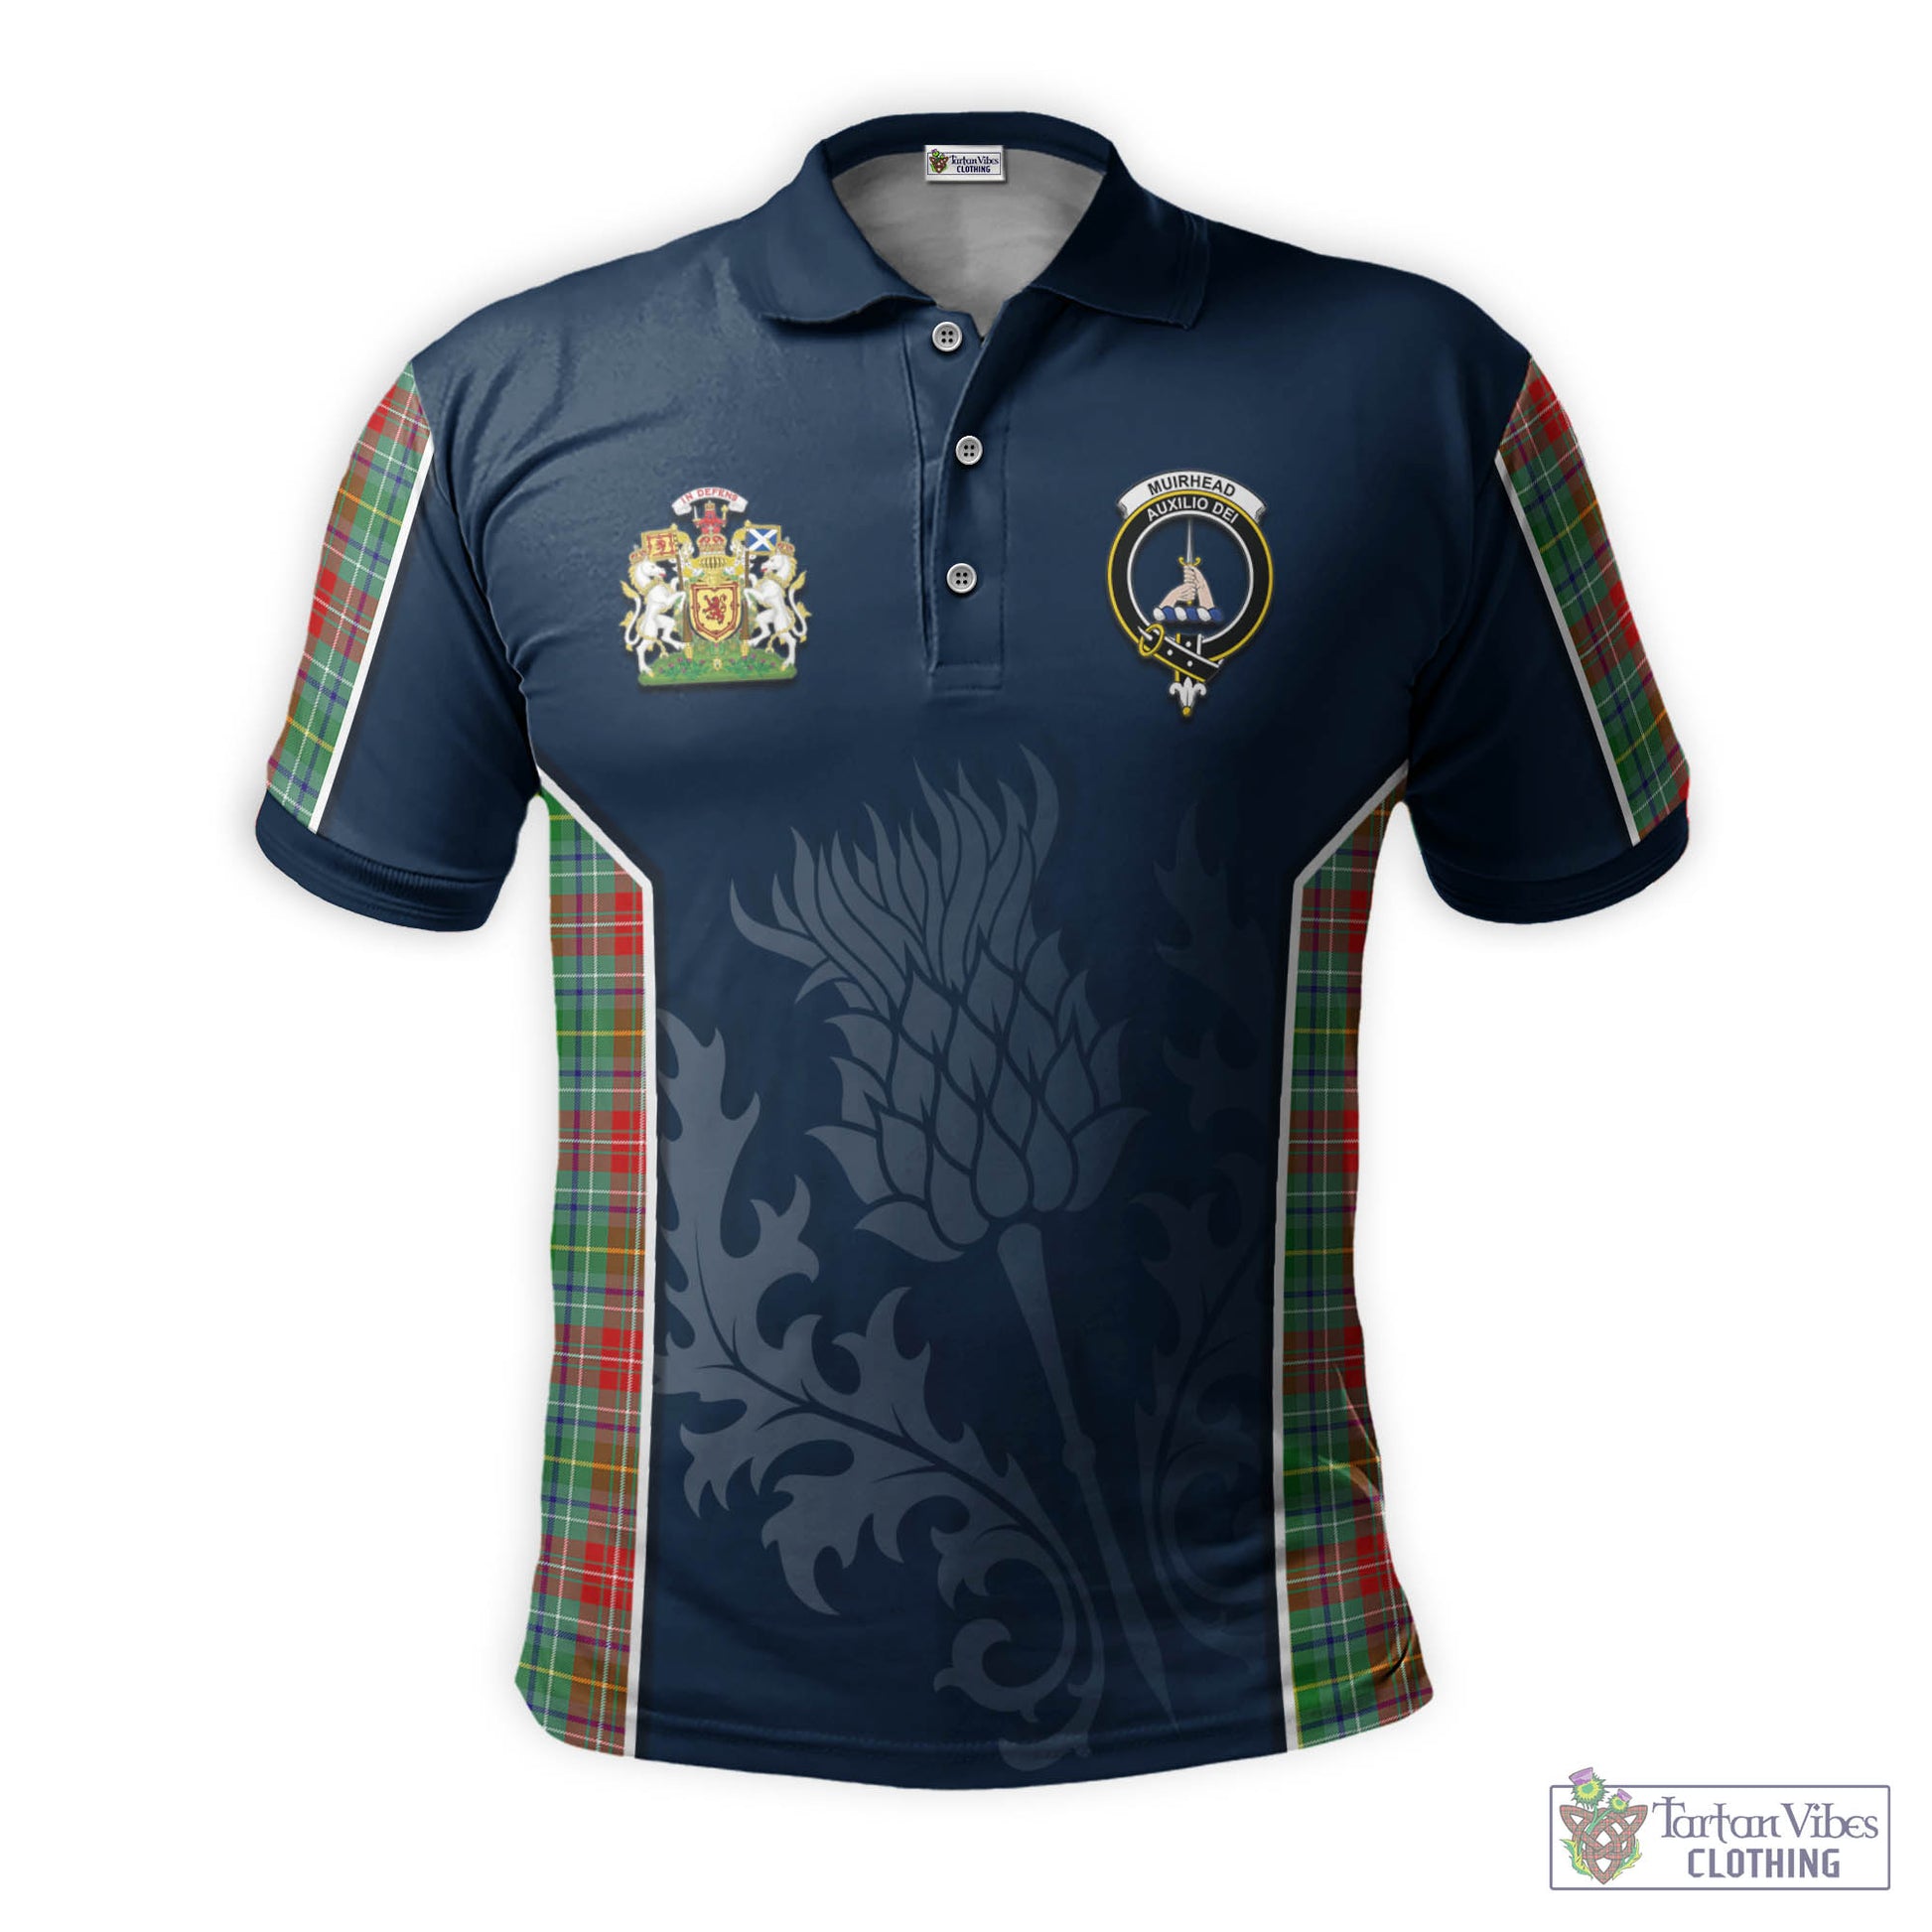 Tartan Vibes Clothing Muirhead Tartan Men's Polo Shirt with Family Crest and Scottish Thistle Vibes Sport Style